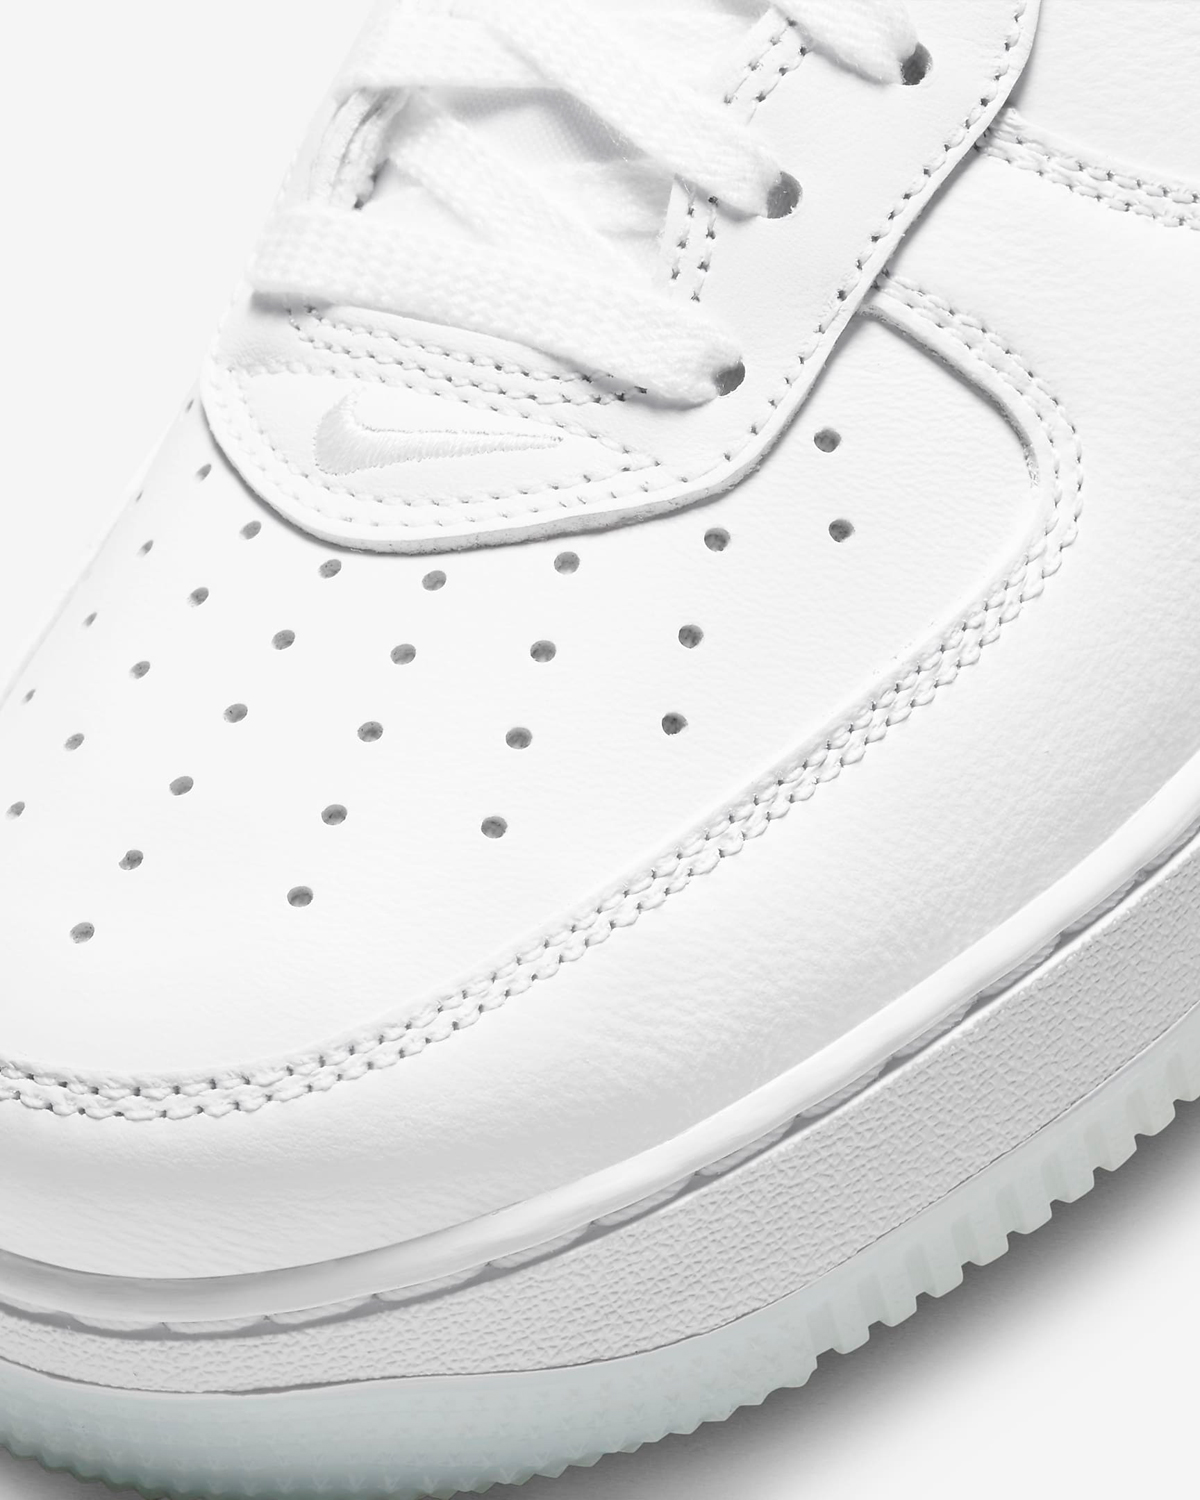 Nike-Air-Force-1-Low-White-Jewel-Color-of-the-Month-7